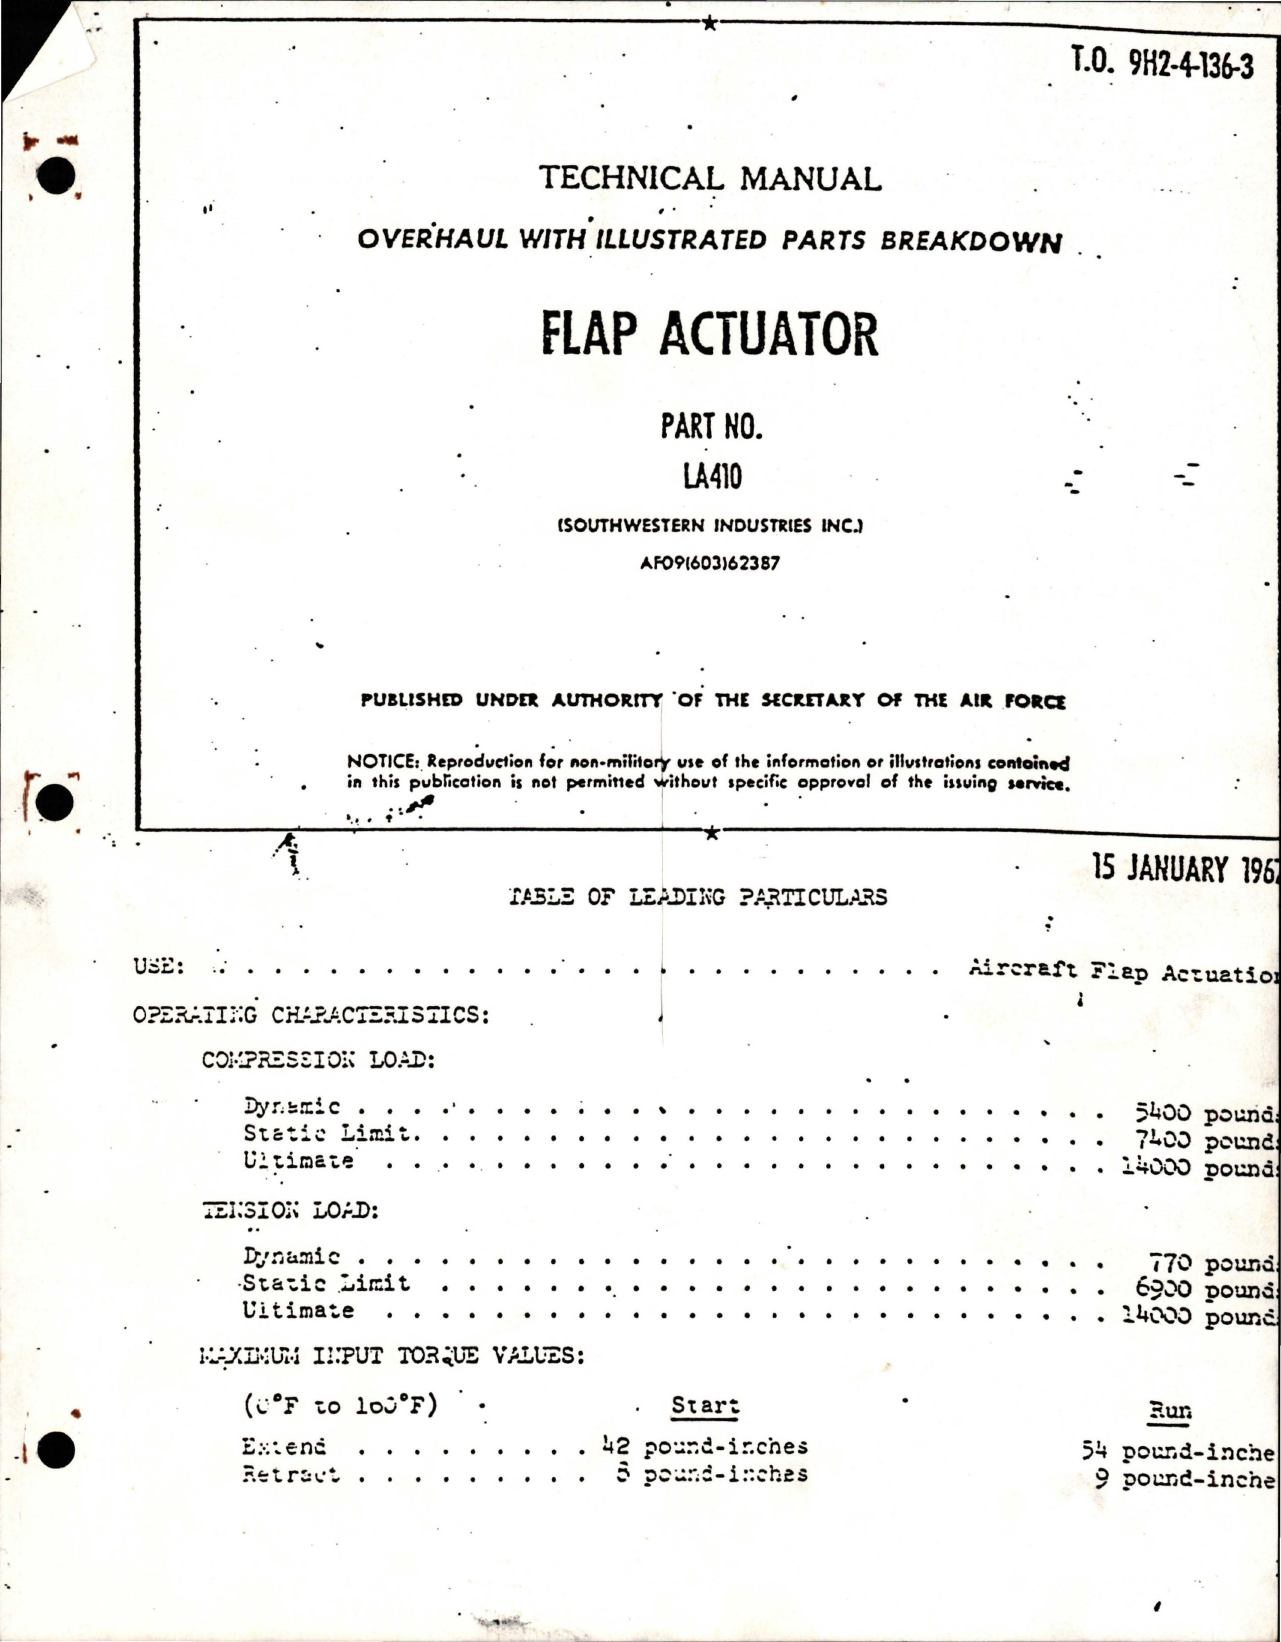 Sample page 1 from AirCorps Library document: Overhaul with Illustrated Parts Breakdown for Flap Actuator - Part LA410